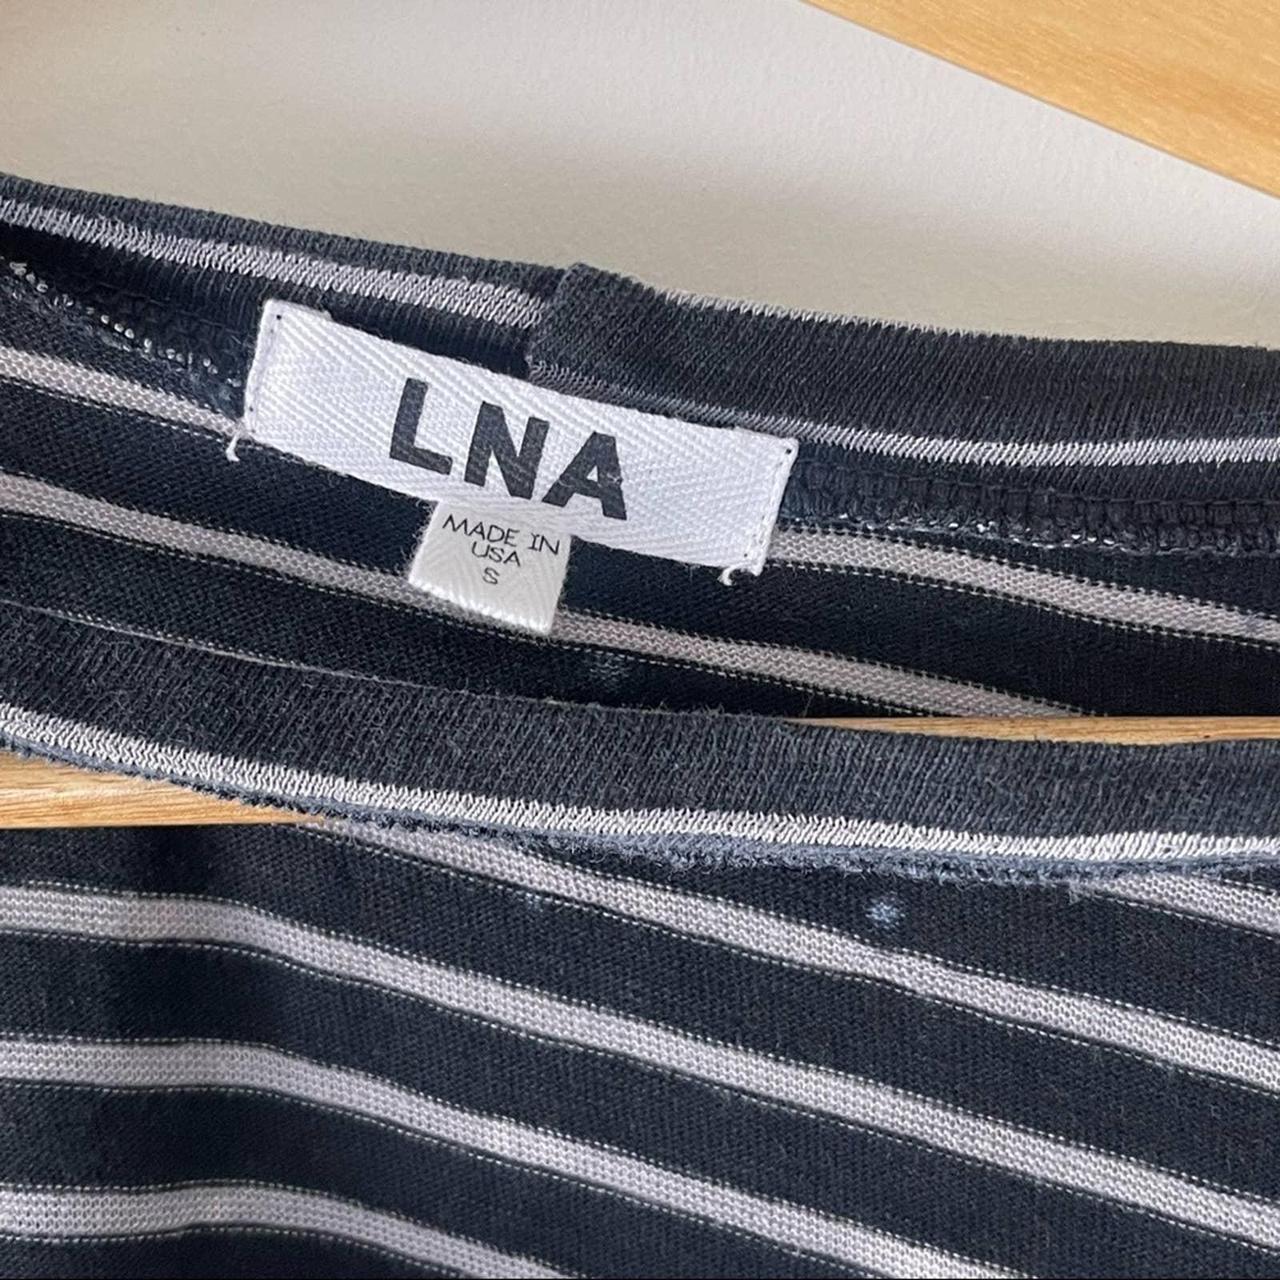 Product Image 4 - LNA Striped Distressed TShirt 

Size: